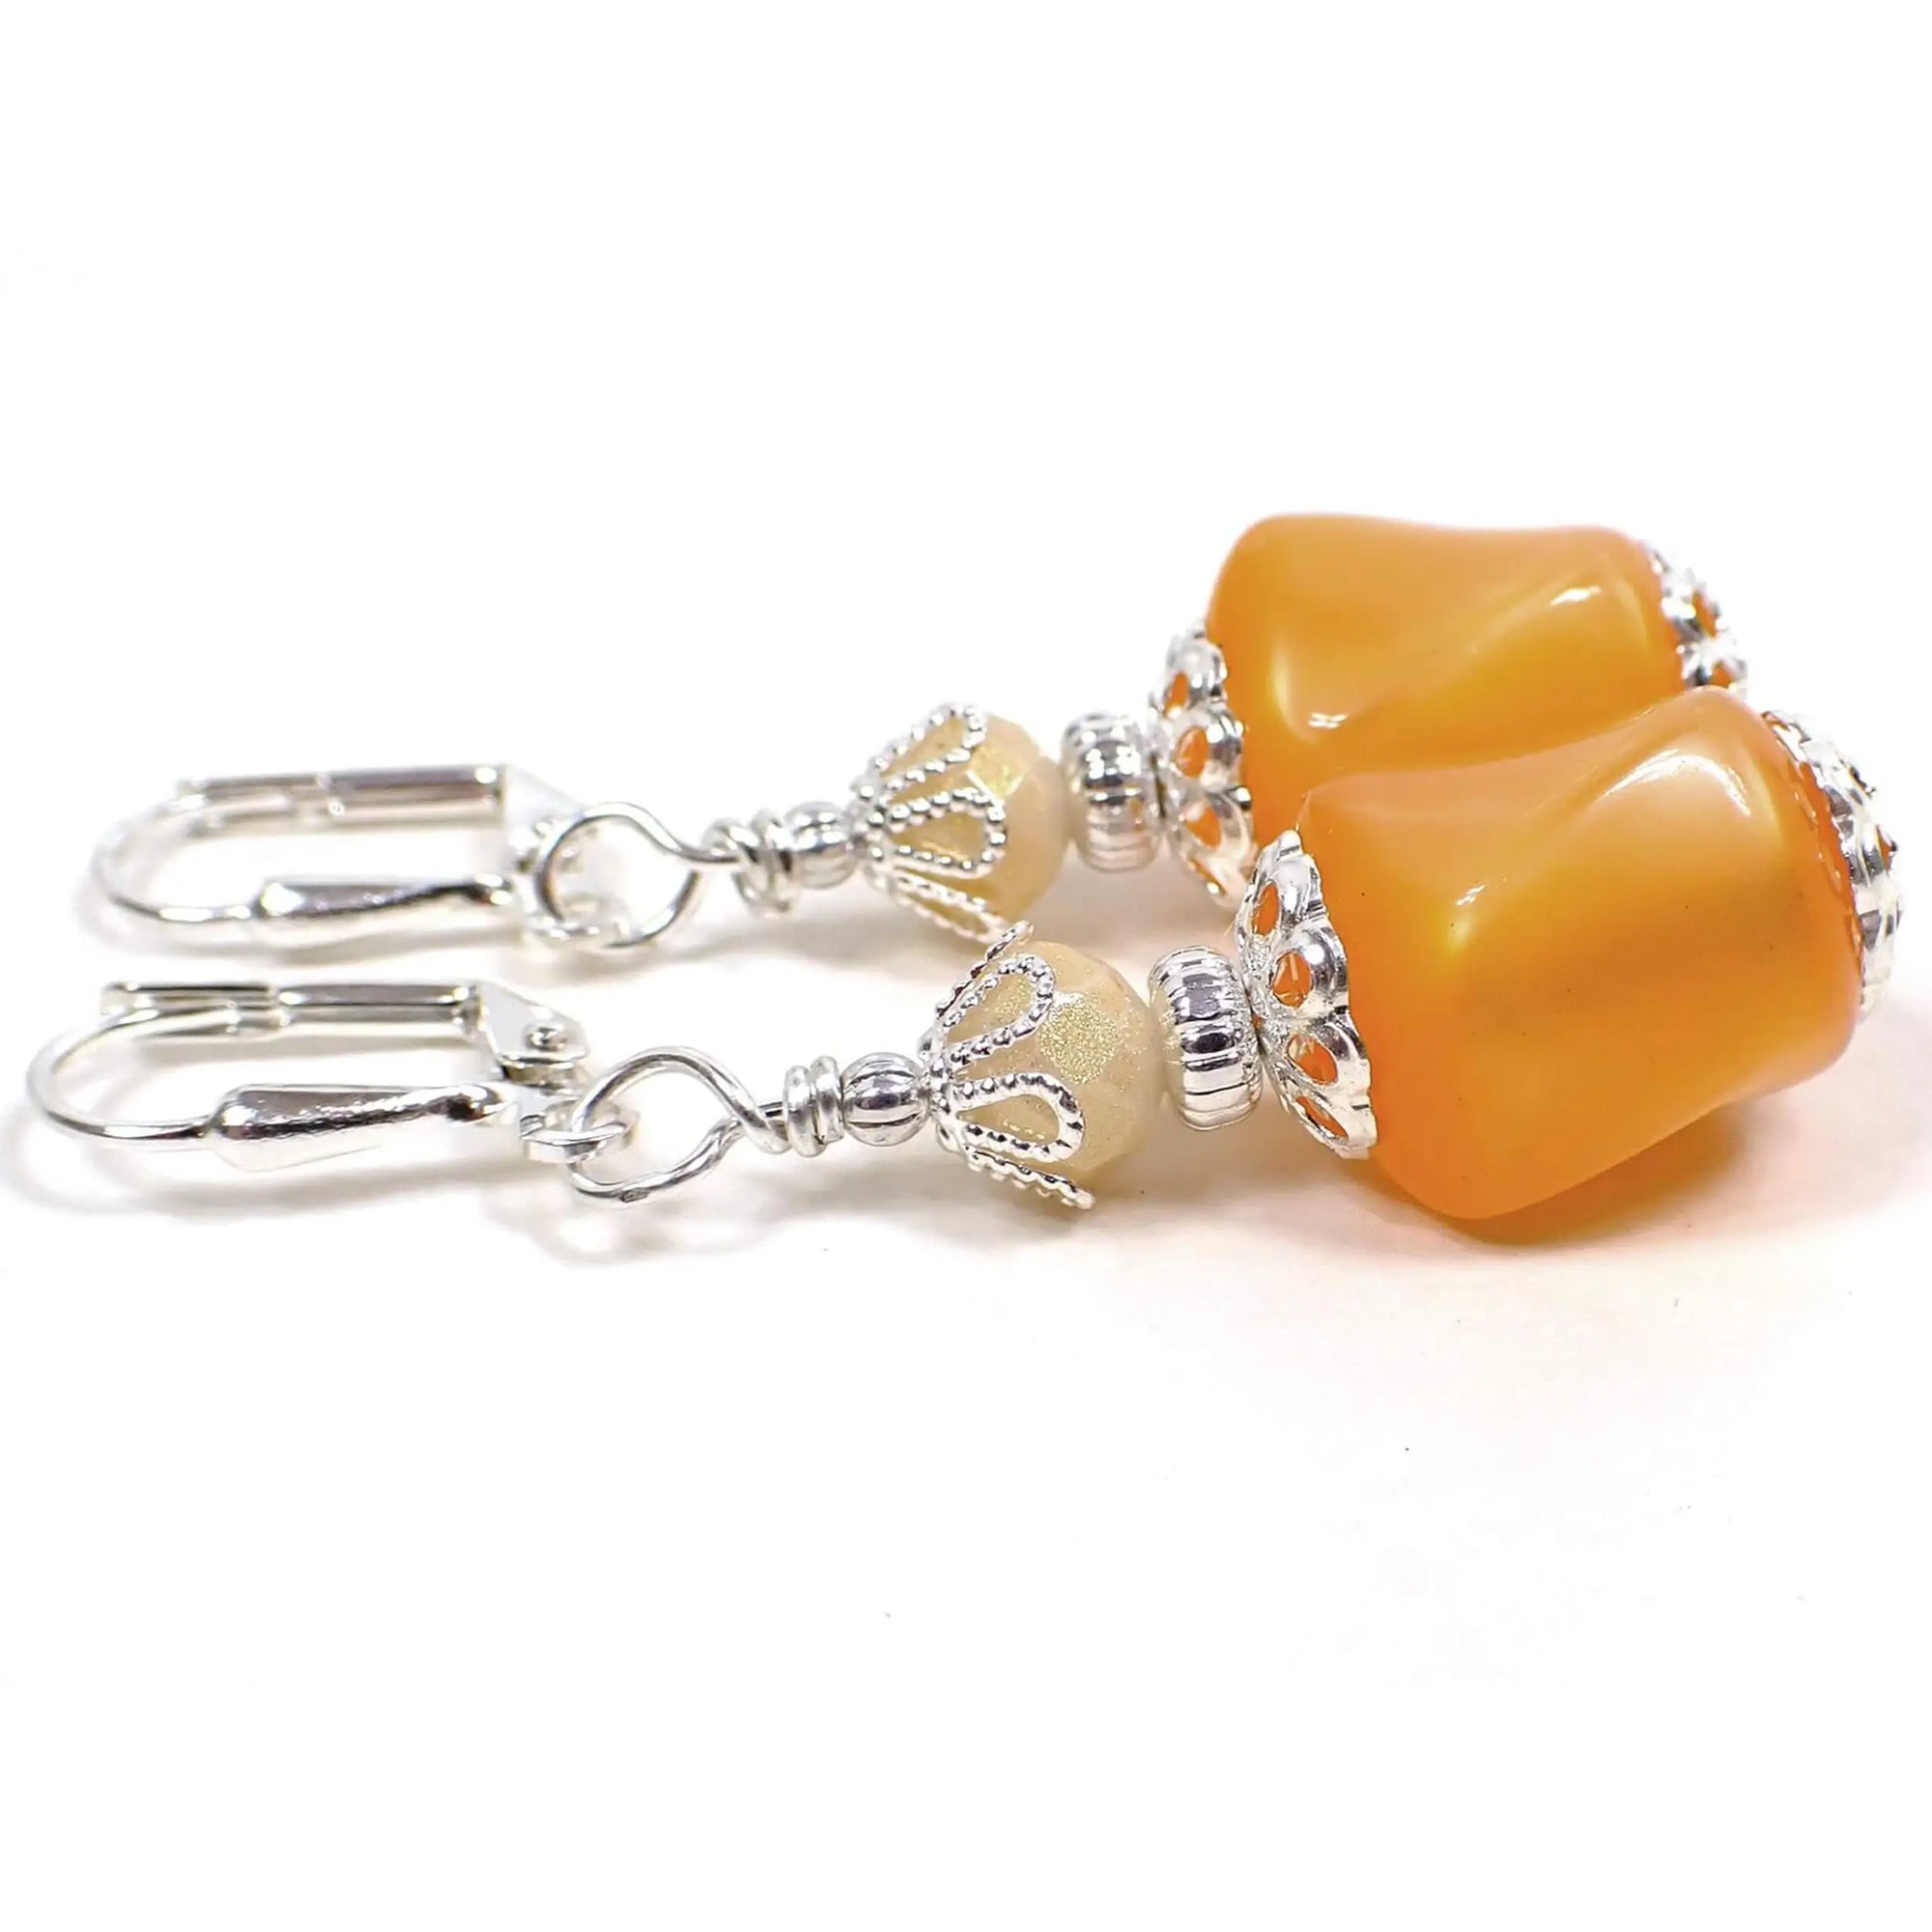 Side view of the handmade earrings with vintage moonglow lucite beads. The metal is silver plated in color. There are new faceted glass beads at the top with a golden sheen color on them. The bottom vintage beads are twisted barrel shaped moonglow lucite in a citrus peach orange color. There is an inner like glow as you move around in the light.